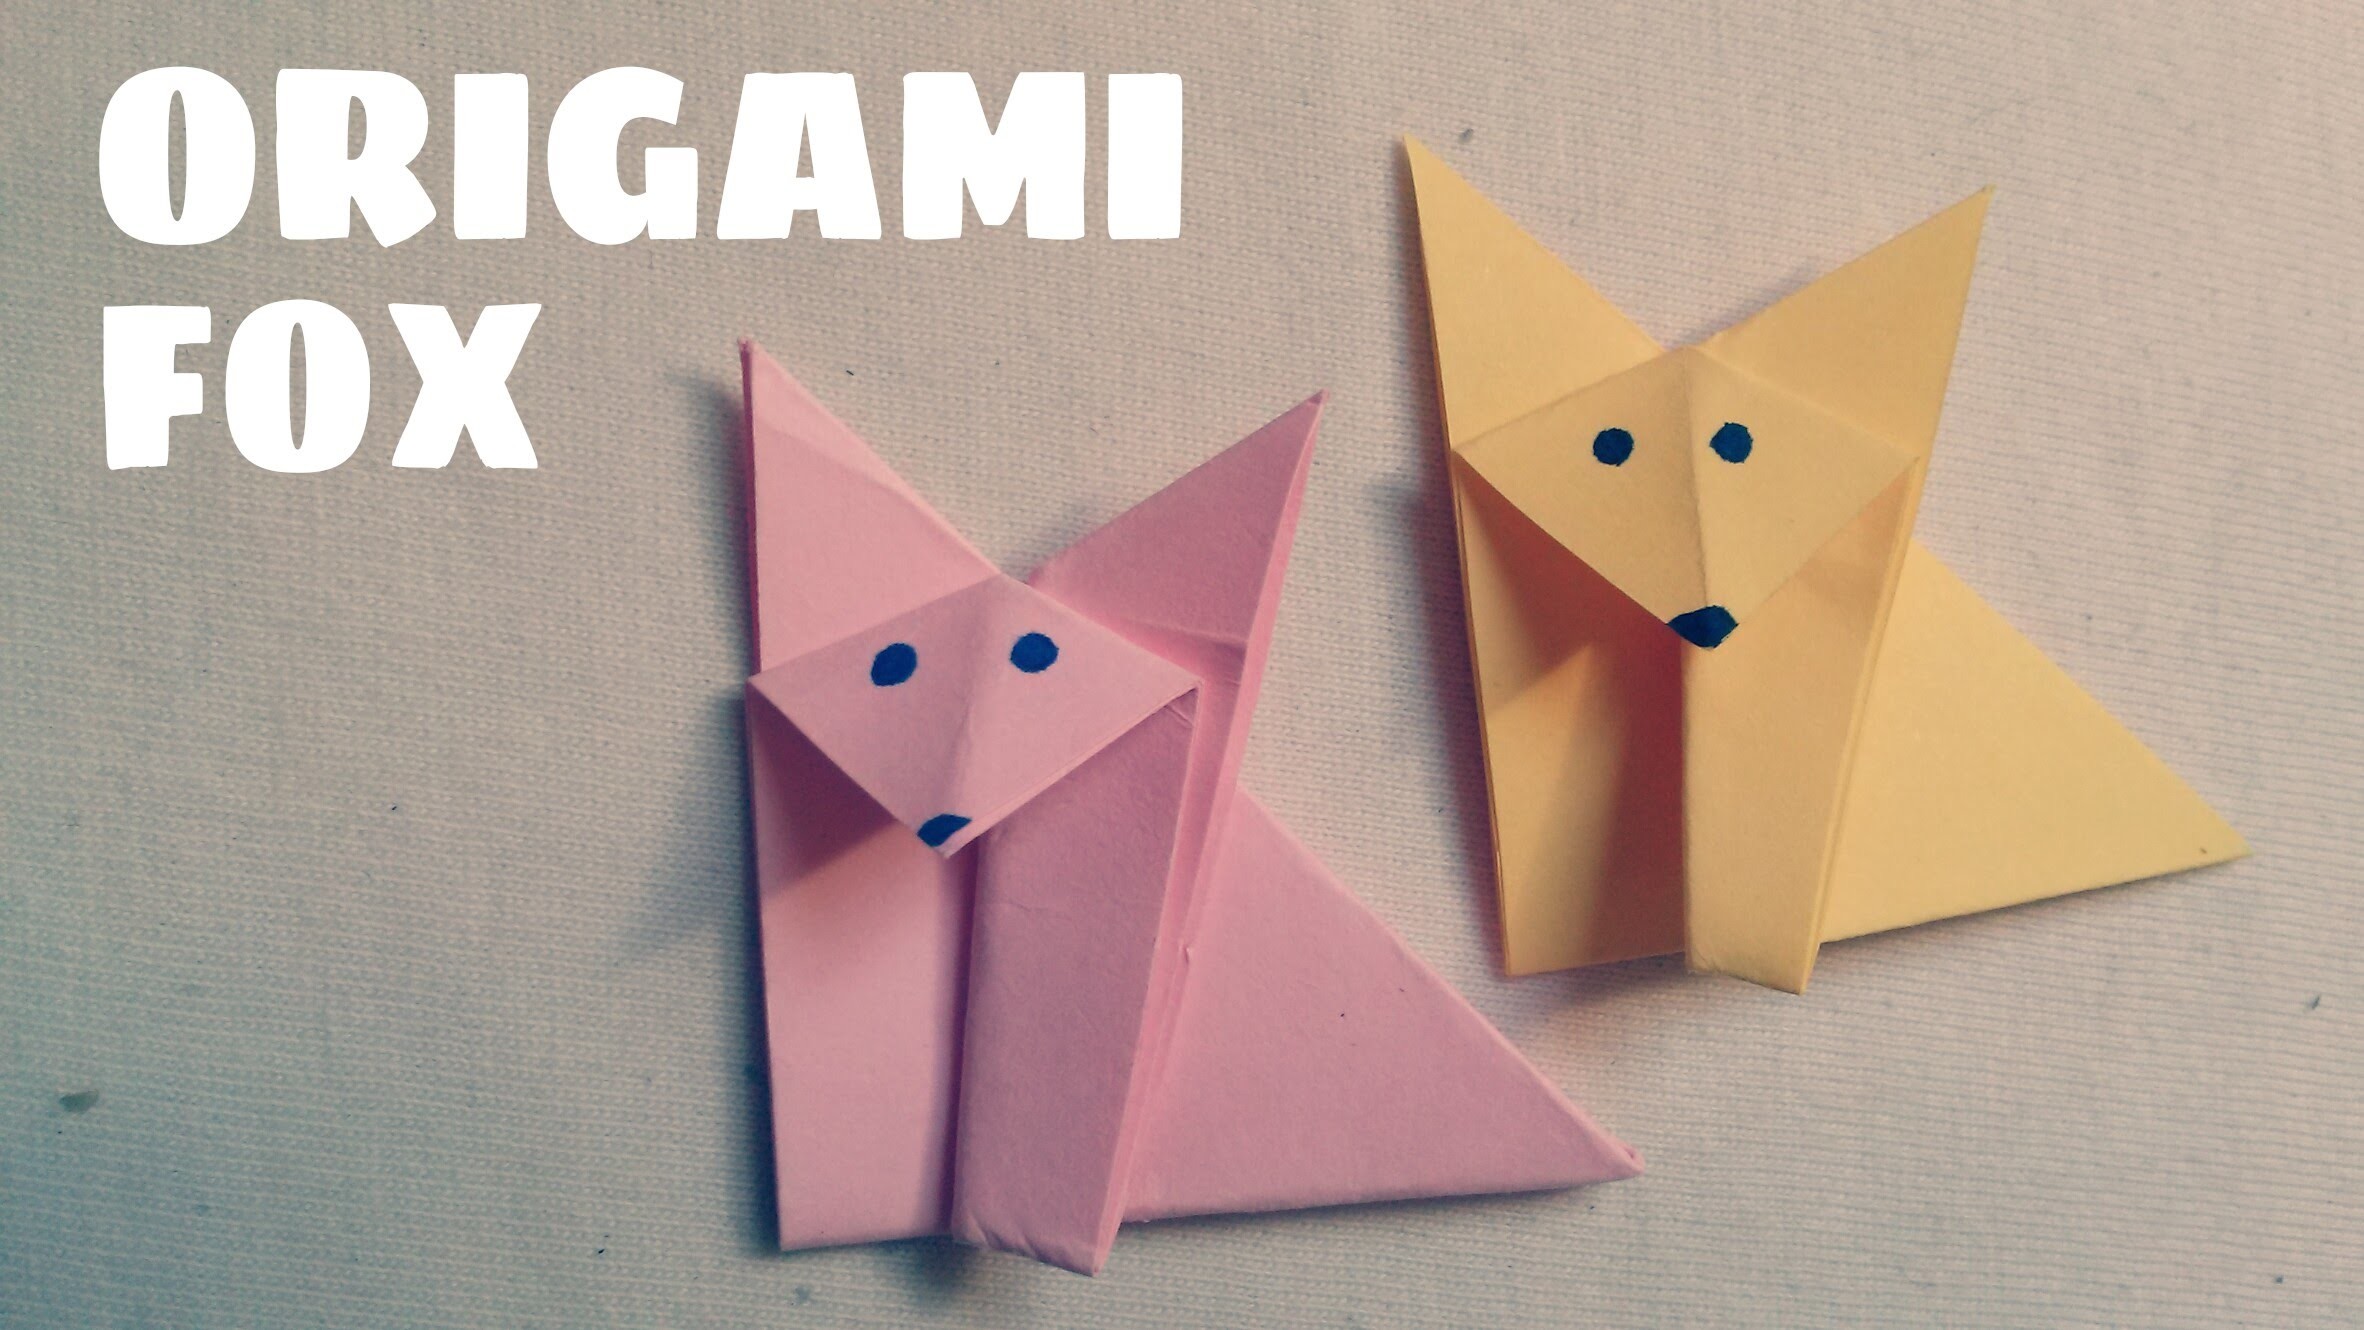 Origami fox tutorial - rodenclassifieds